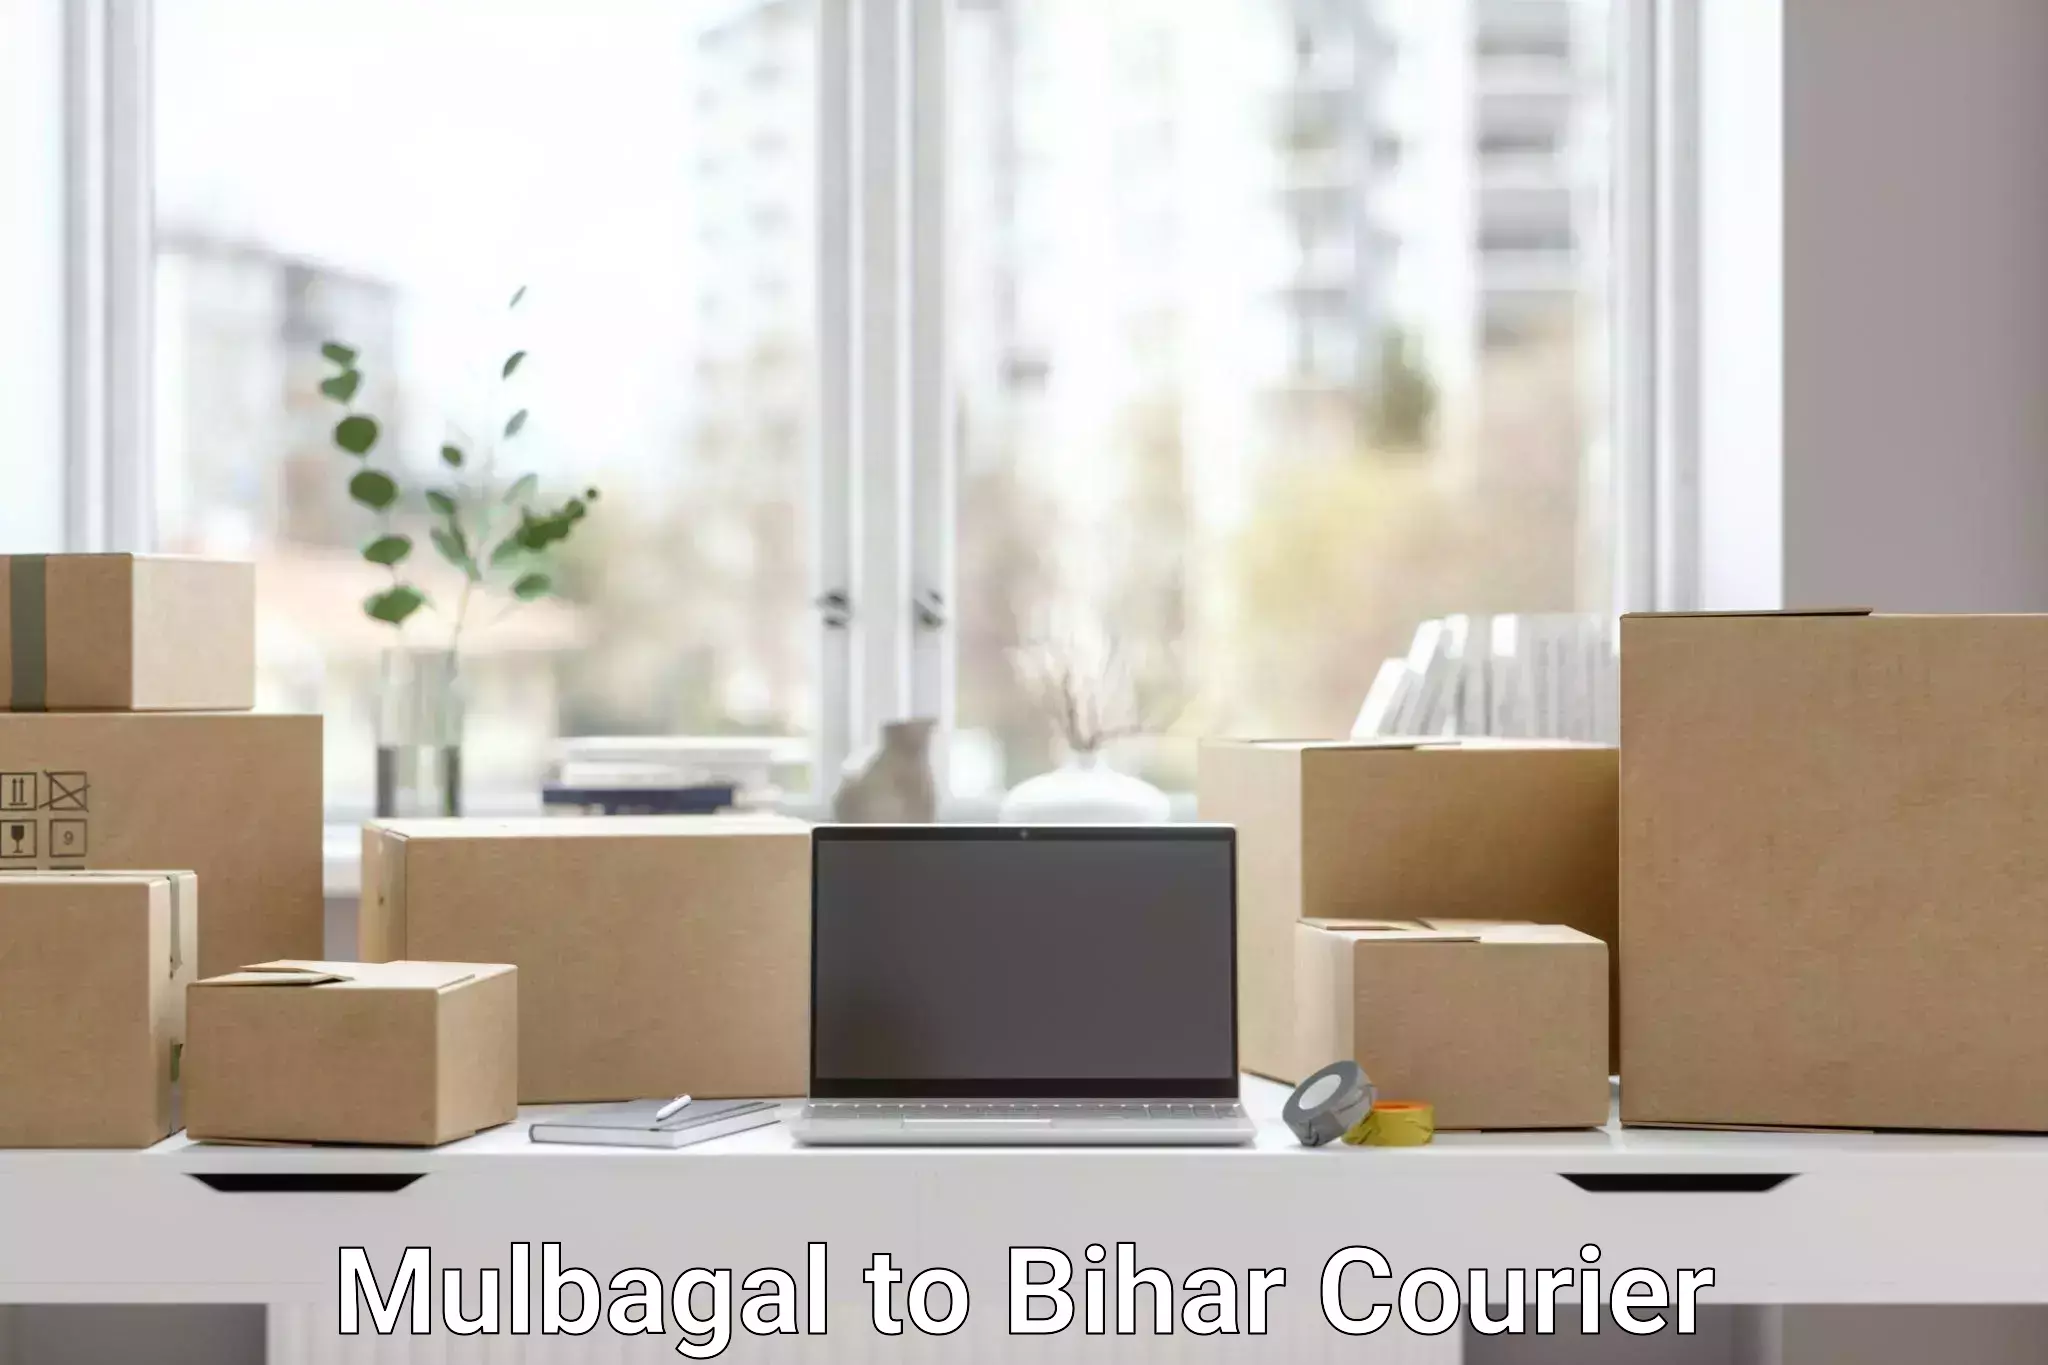 Cash on delivery service Mulbagal to Bihar